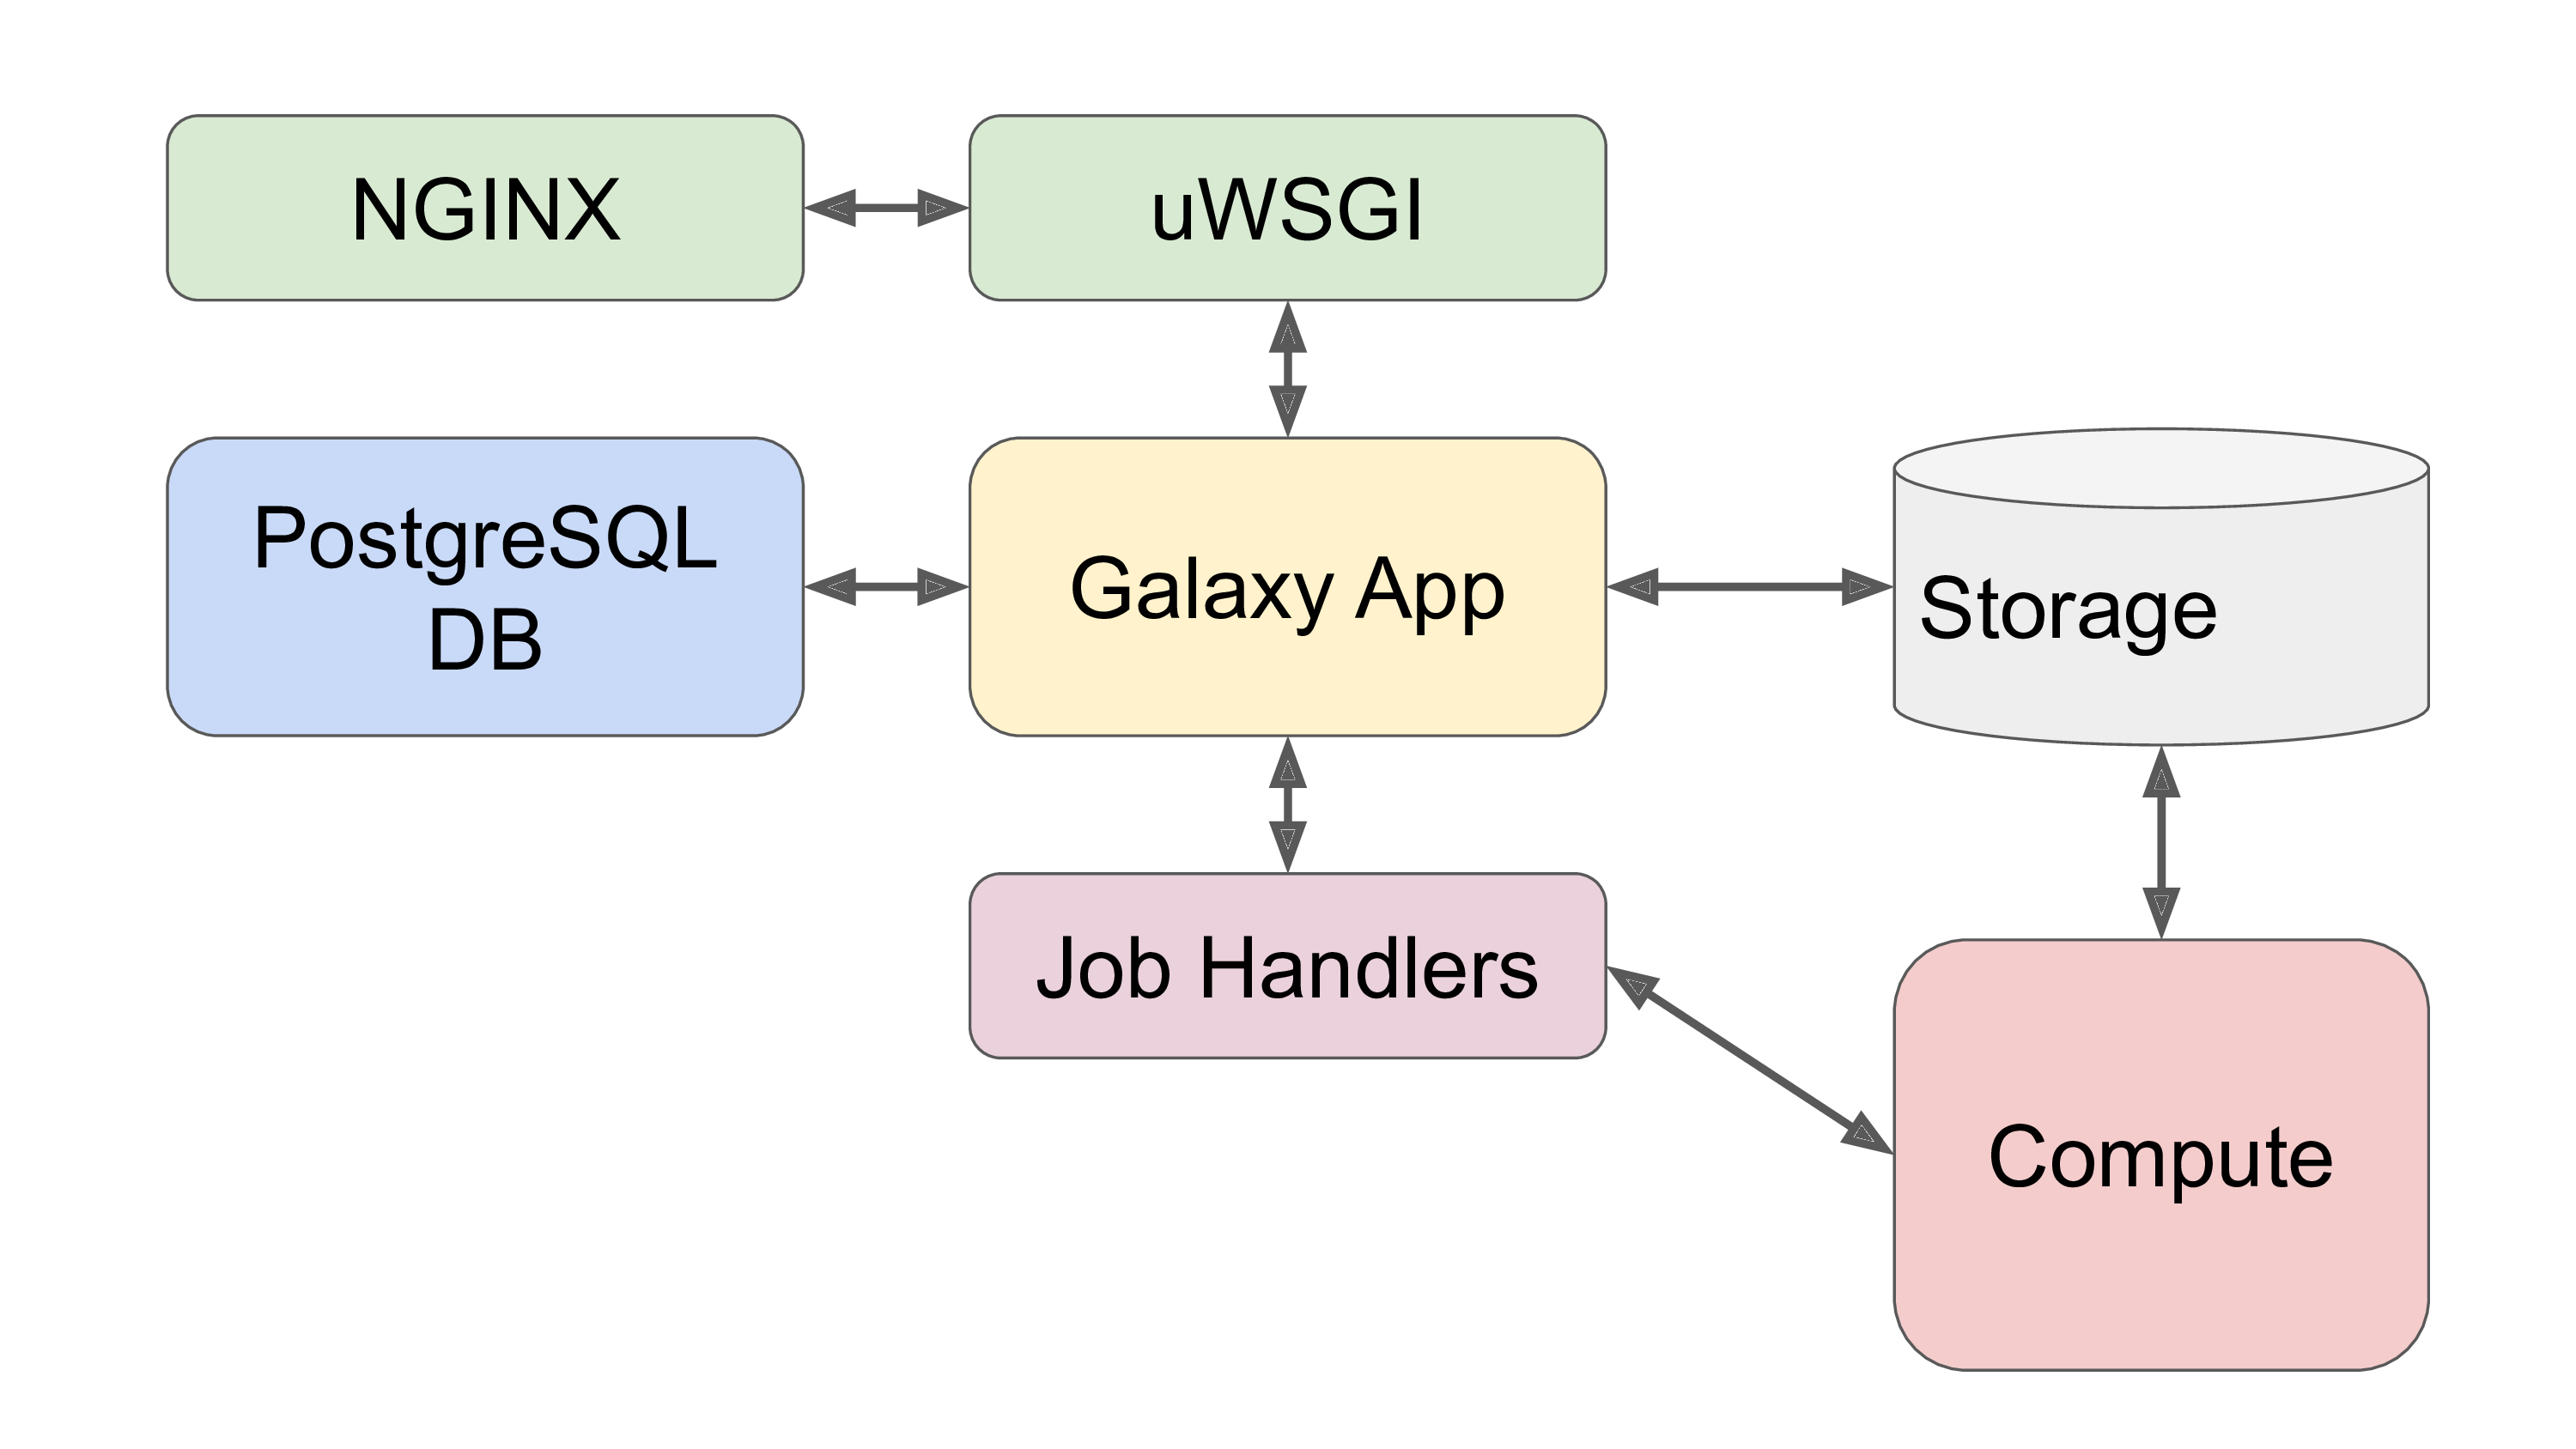 Job Handlers are added, between Galaxy and the Compute